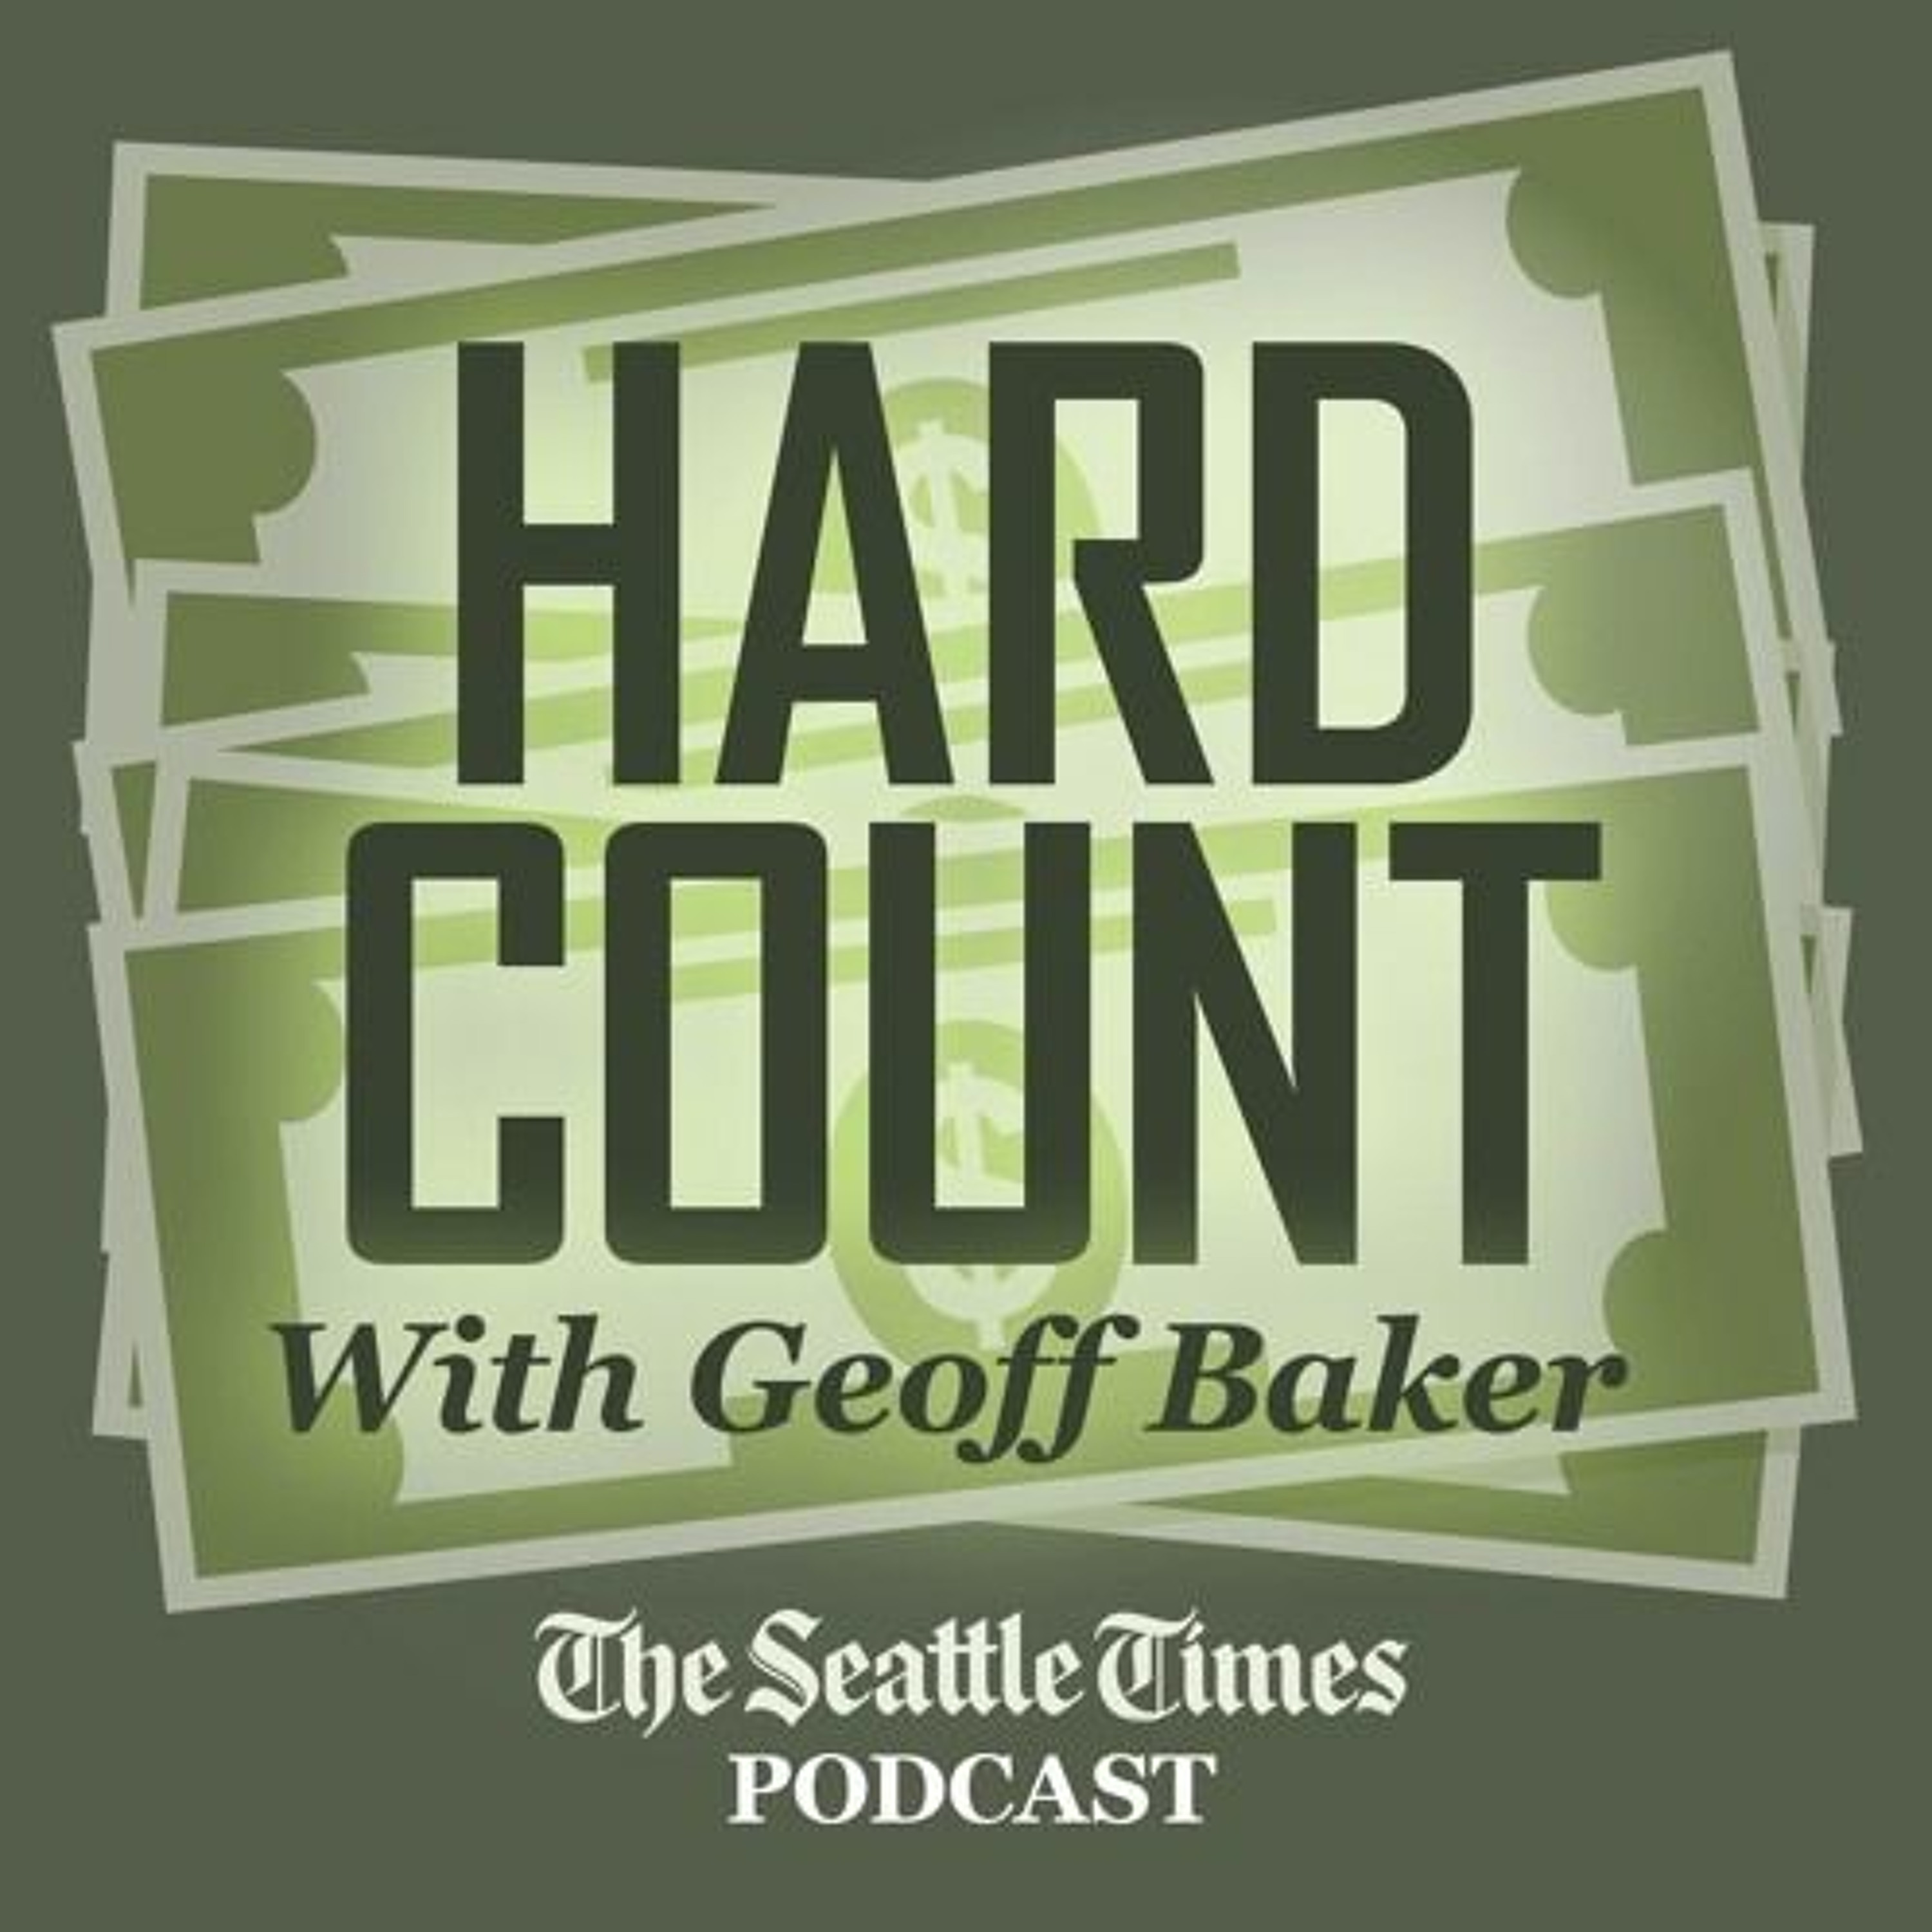 Ep. 19: Comparing the city of Seattle's arena plans